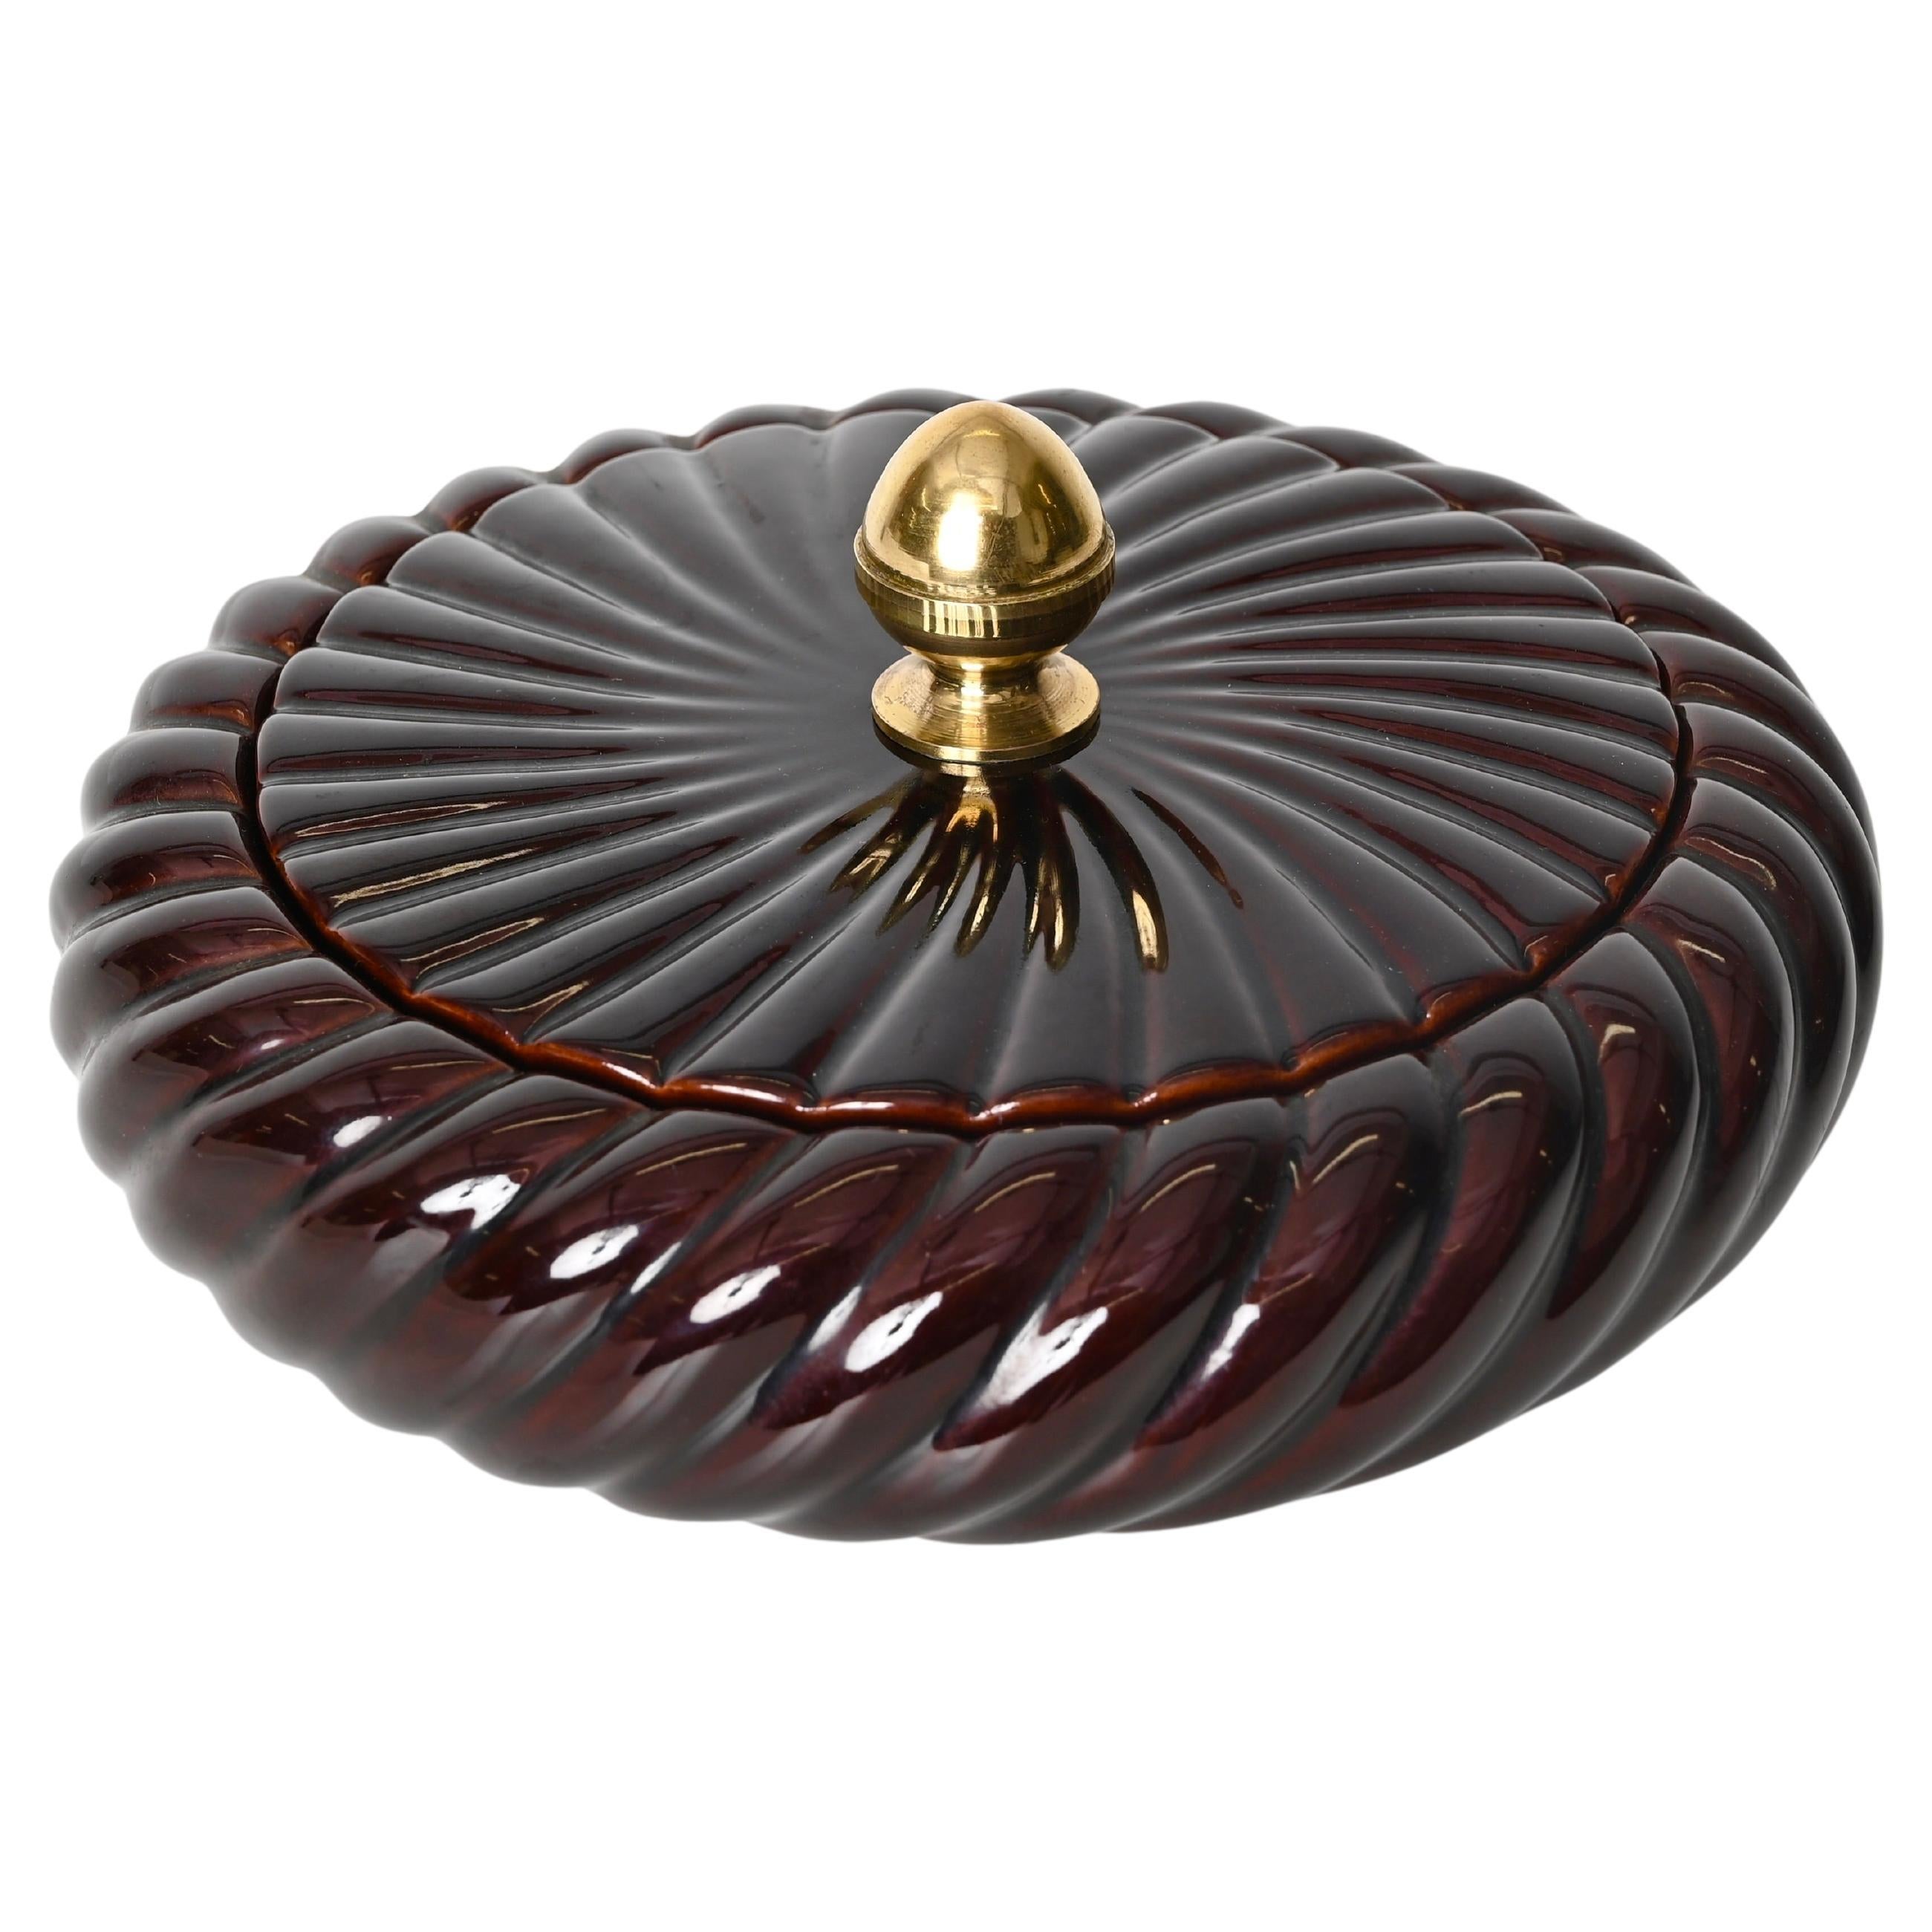 Tommaso Barbi Brown Ceramic and Brass Decorative Box or Centerpiece, Italy 1970s